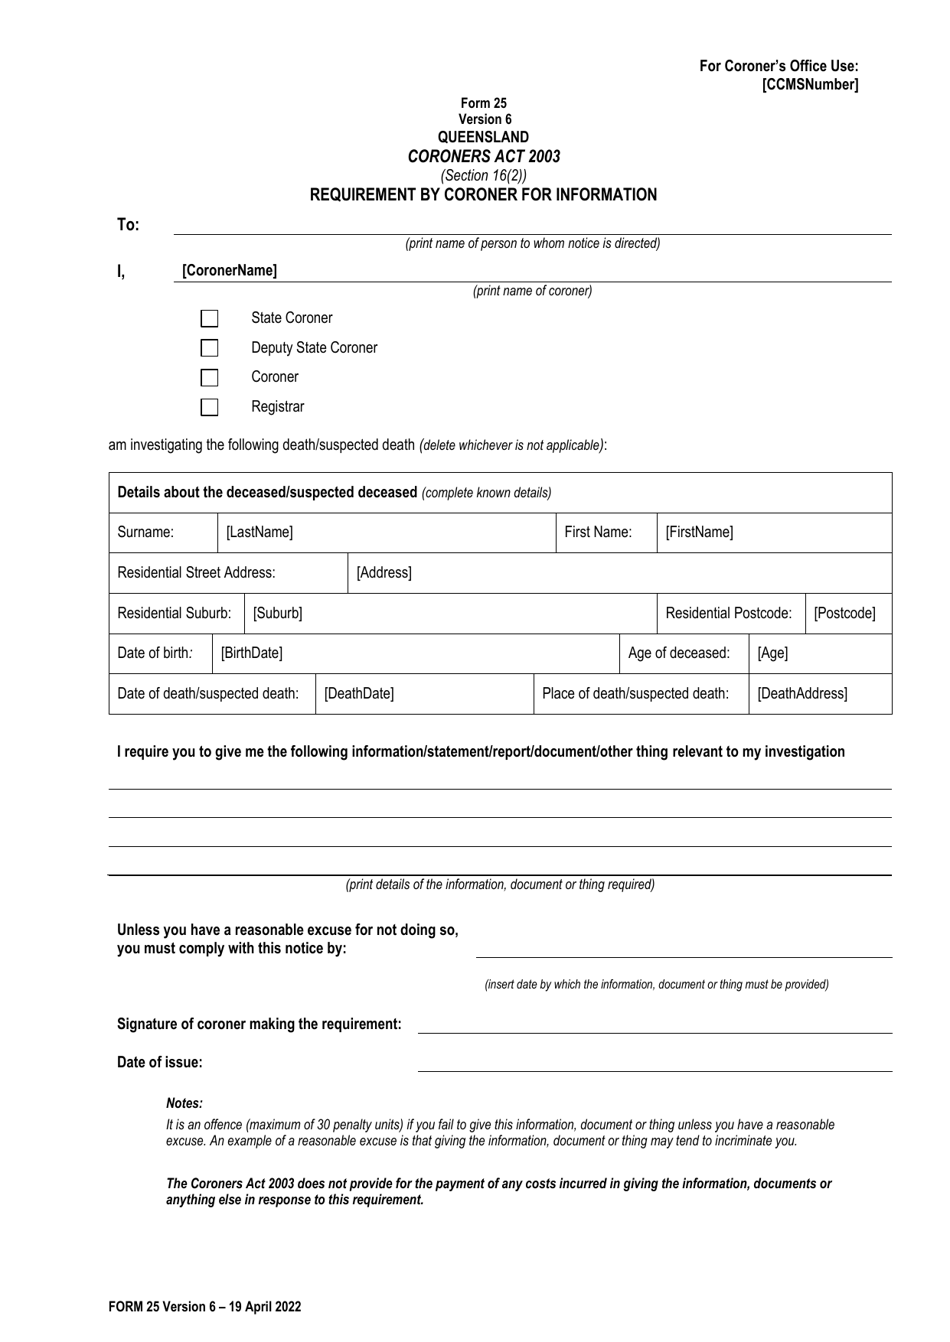 Form 25 Requirement by Coroner for Information - Queensland, Australia, Page 1